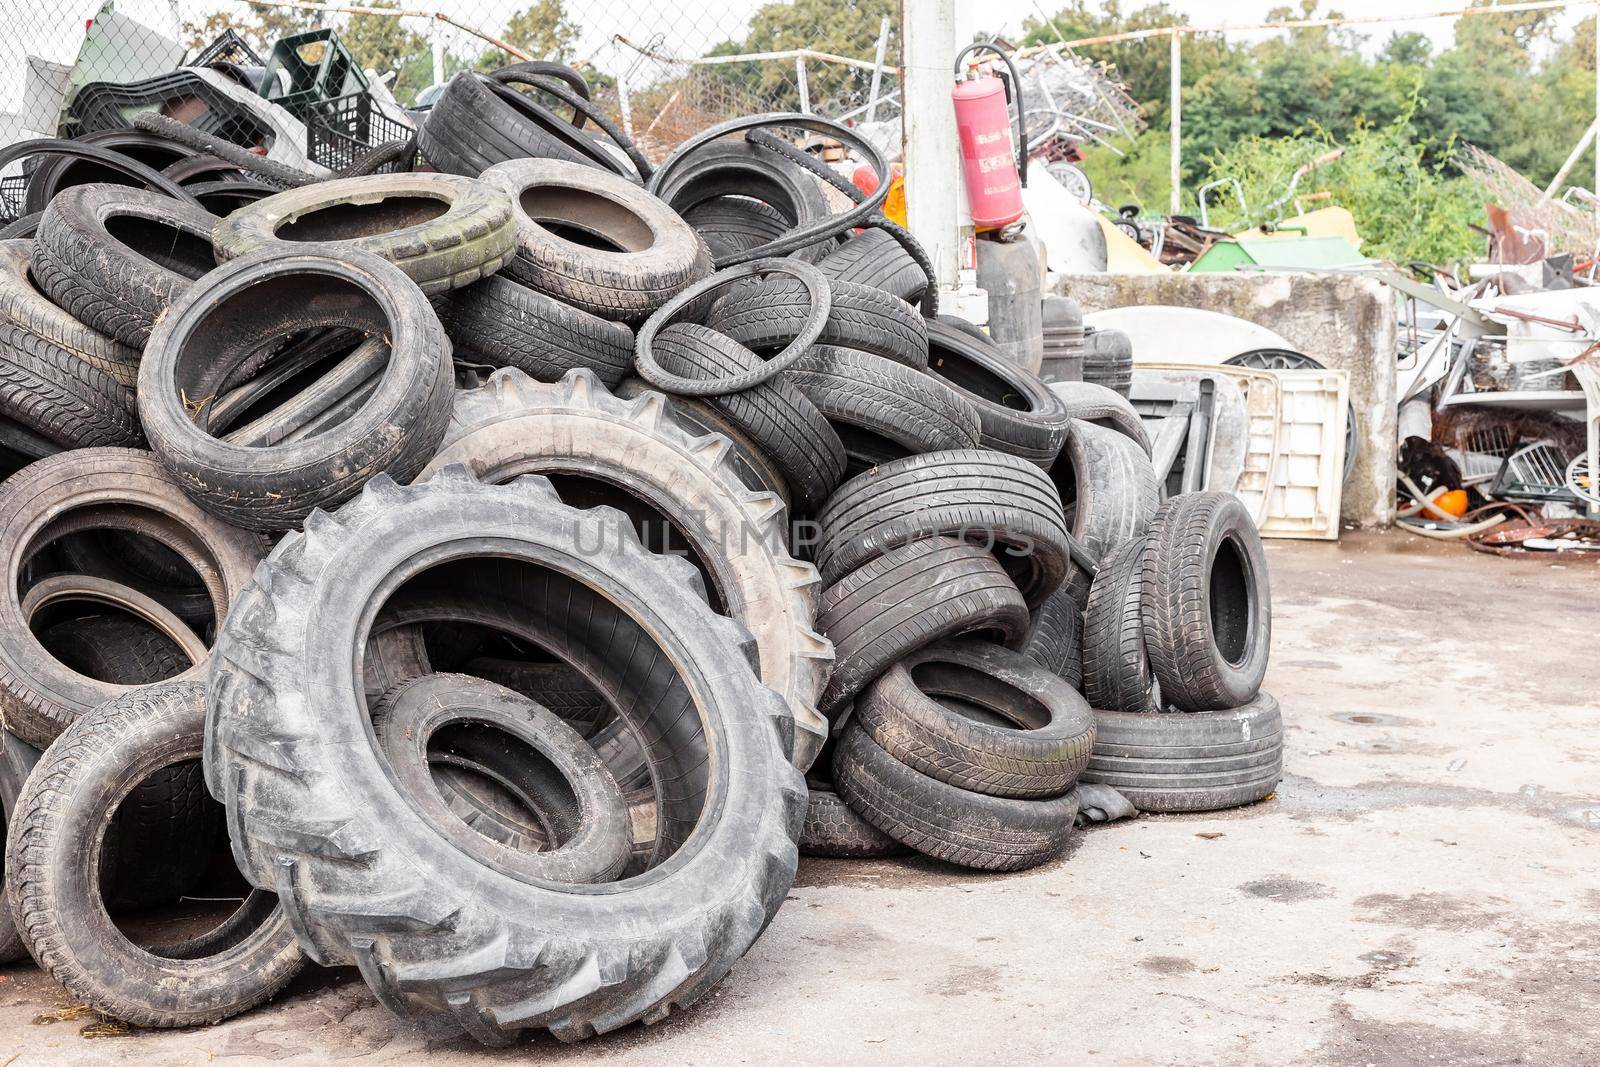 City dump with old tires and tyres for recycling. Recycling of the waste rubber tyres. Disposal of worn out wheels for recycling.